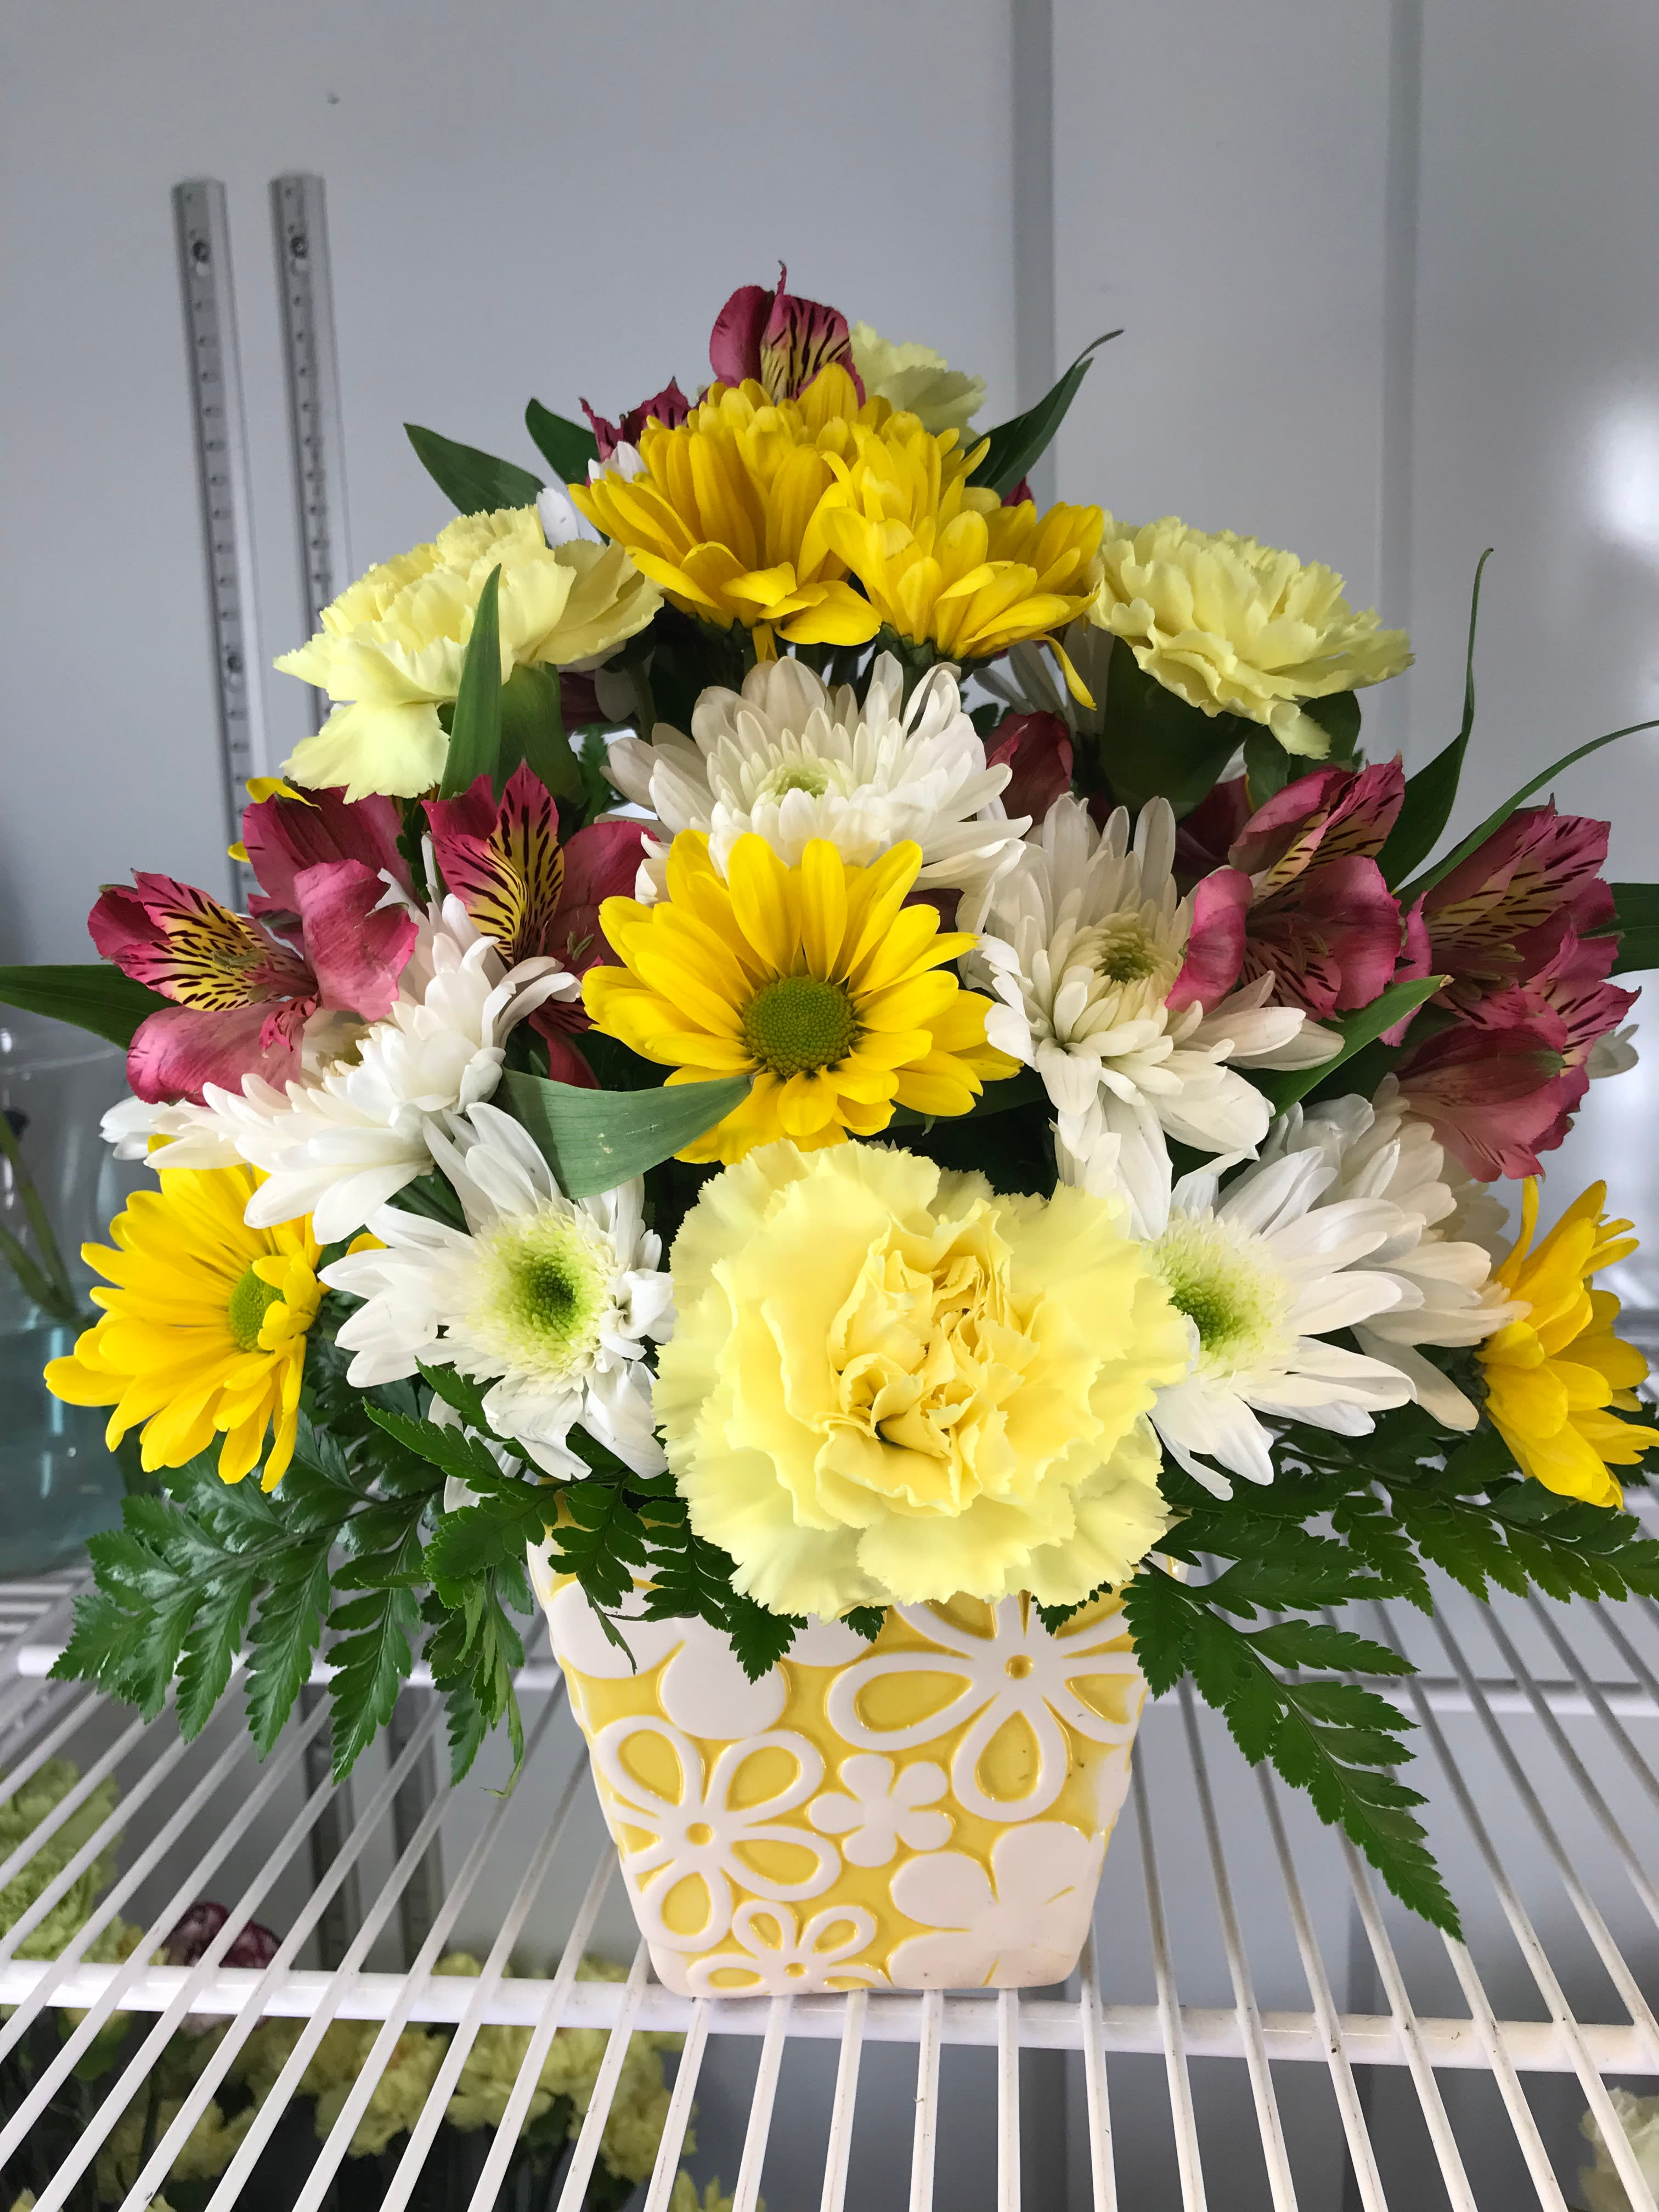 Daisy Doodle - Deliver some sunshine in our Daisy Doodle container sure to brighten anyone's day - just because or perfect for any occasion -  CONTAINER IS NO LONGER AVAILABLE - WE WILL DO OUR BEST TO PICK A SUITABLE REPLACEMENT